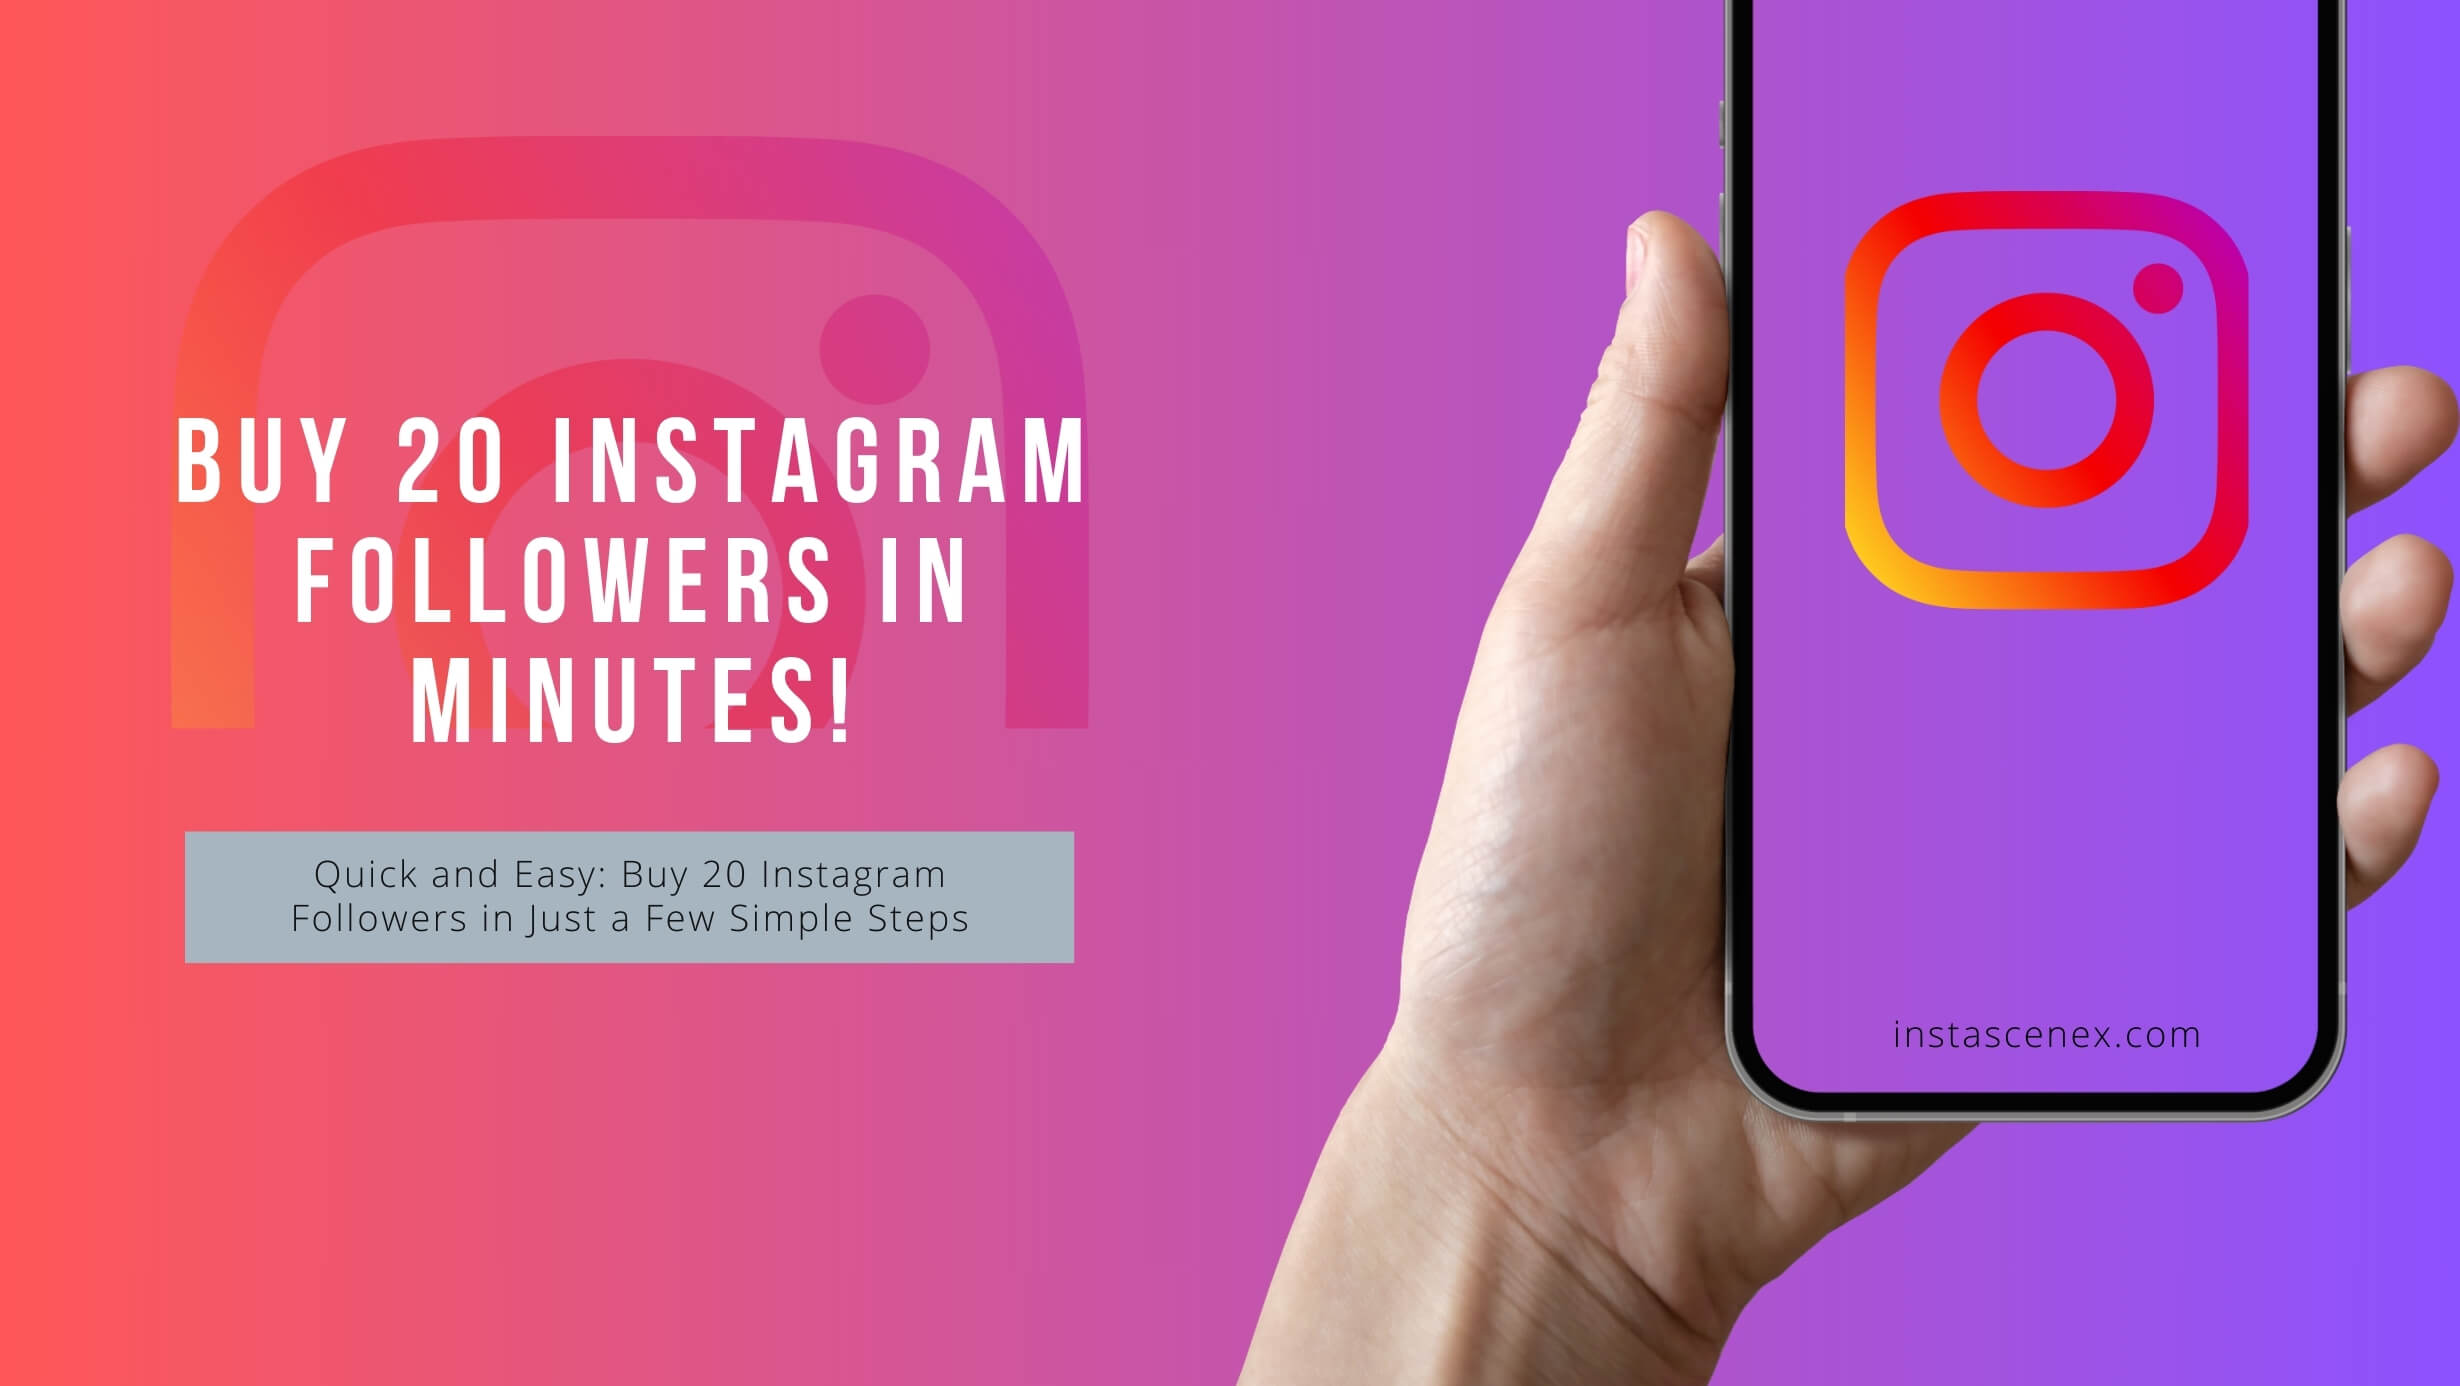 Quick and Easy: Buy 20 Instagram Followers in Just a Few Simple Steps